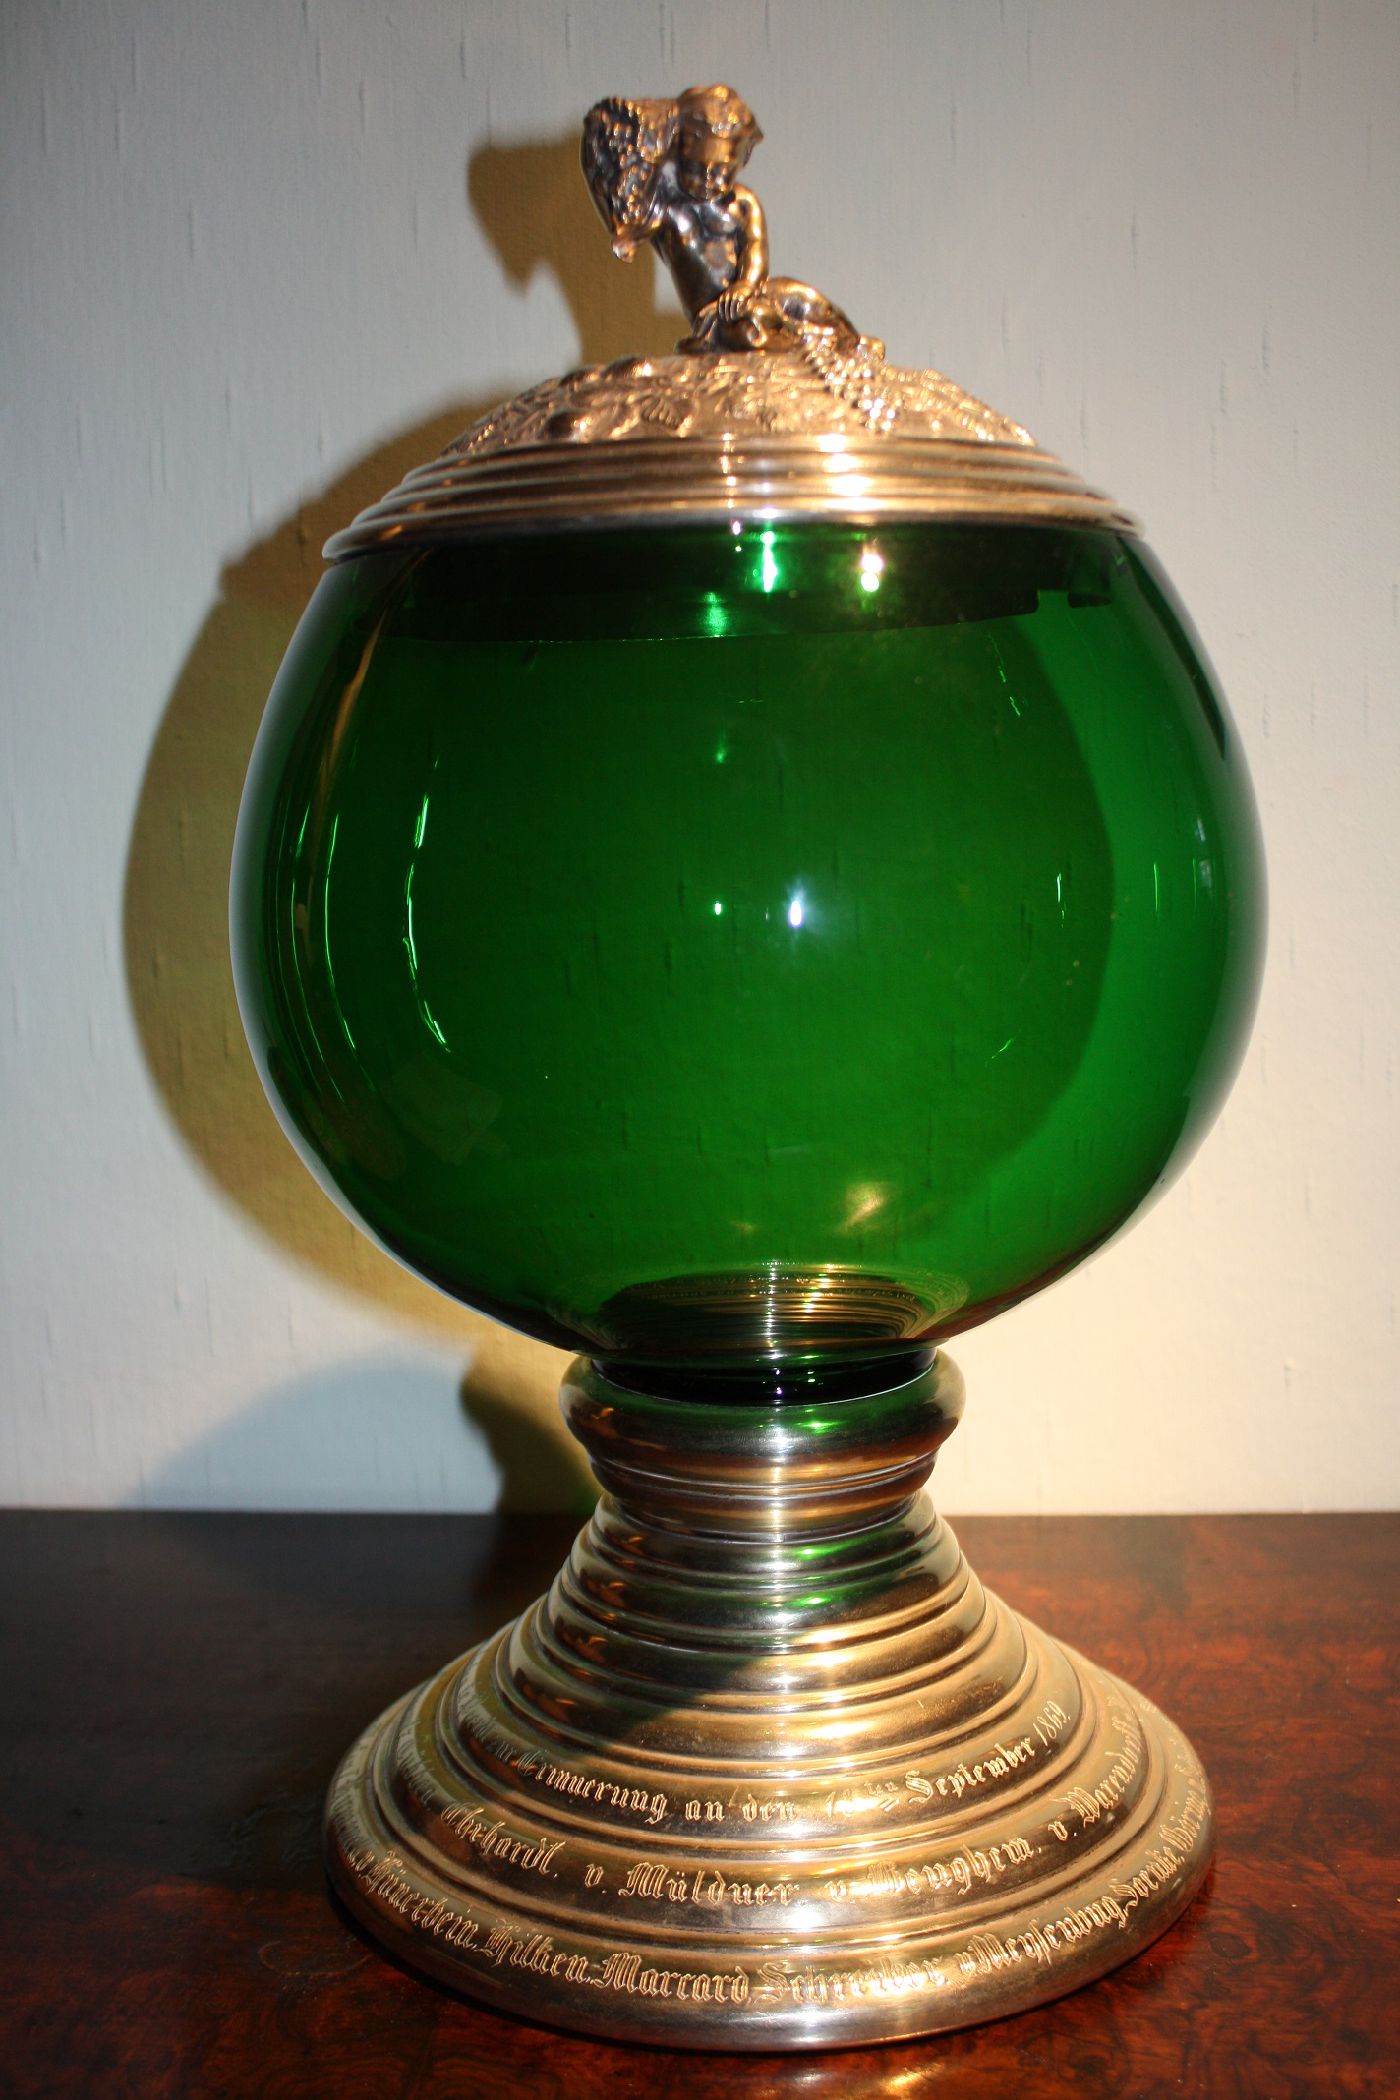 Large antique Mid-19th century 925 silver foot and lid, green glass bowl, bowle pot with engravings